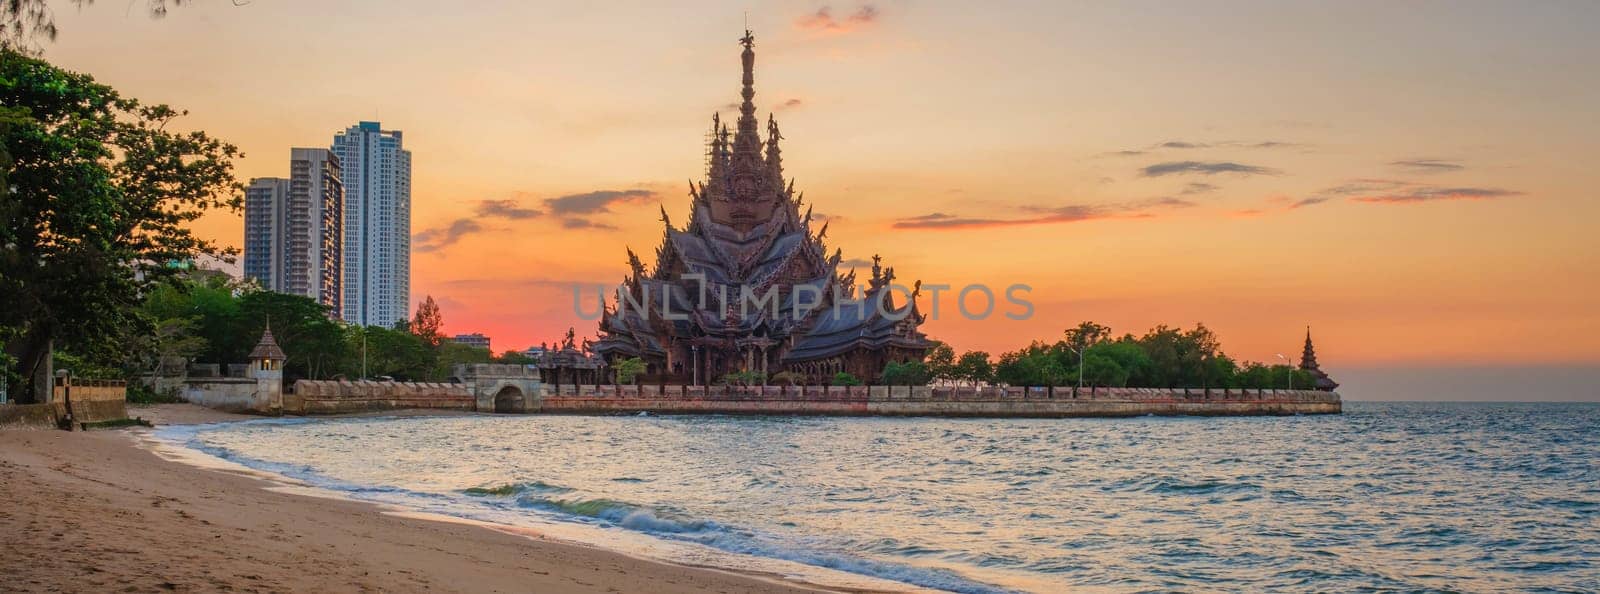 The Sanctuary of Truth wooden temple in Pattaya Thailand at sunset by the ocean beach of Pattaya